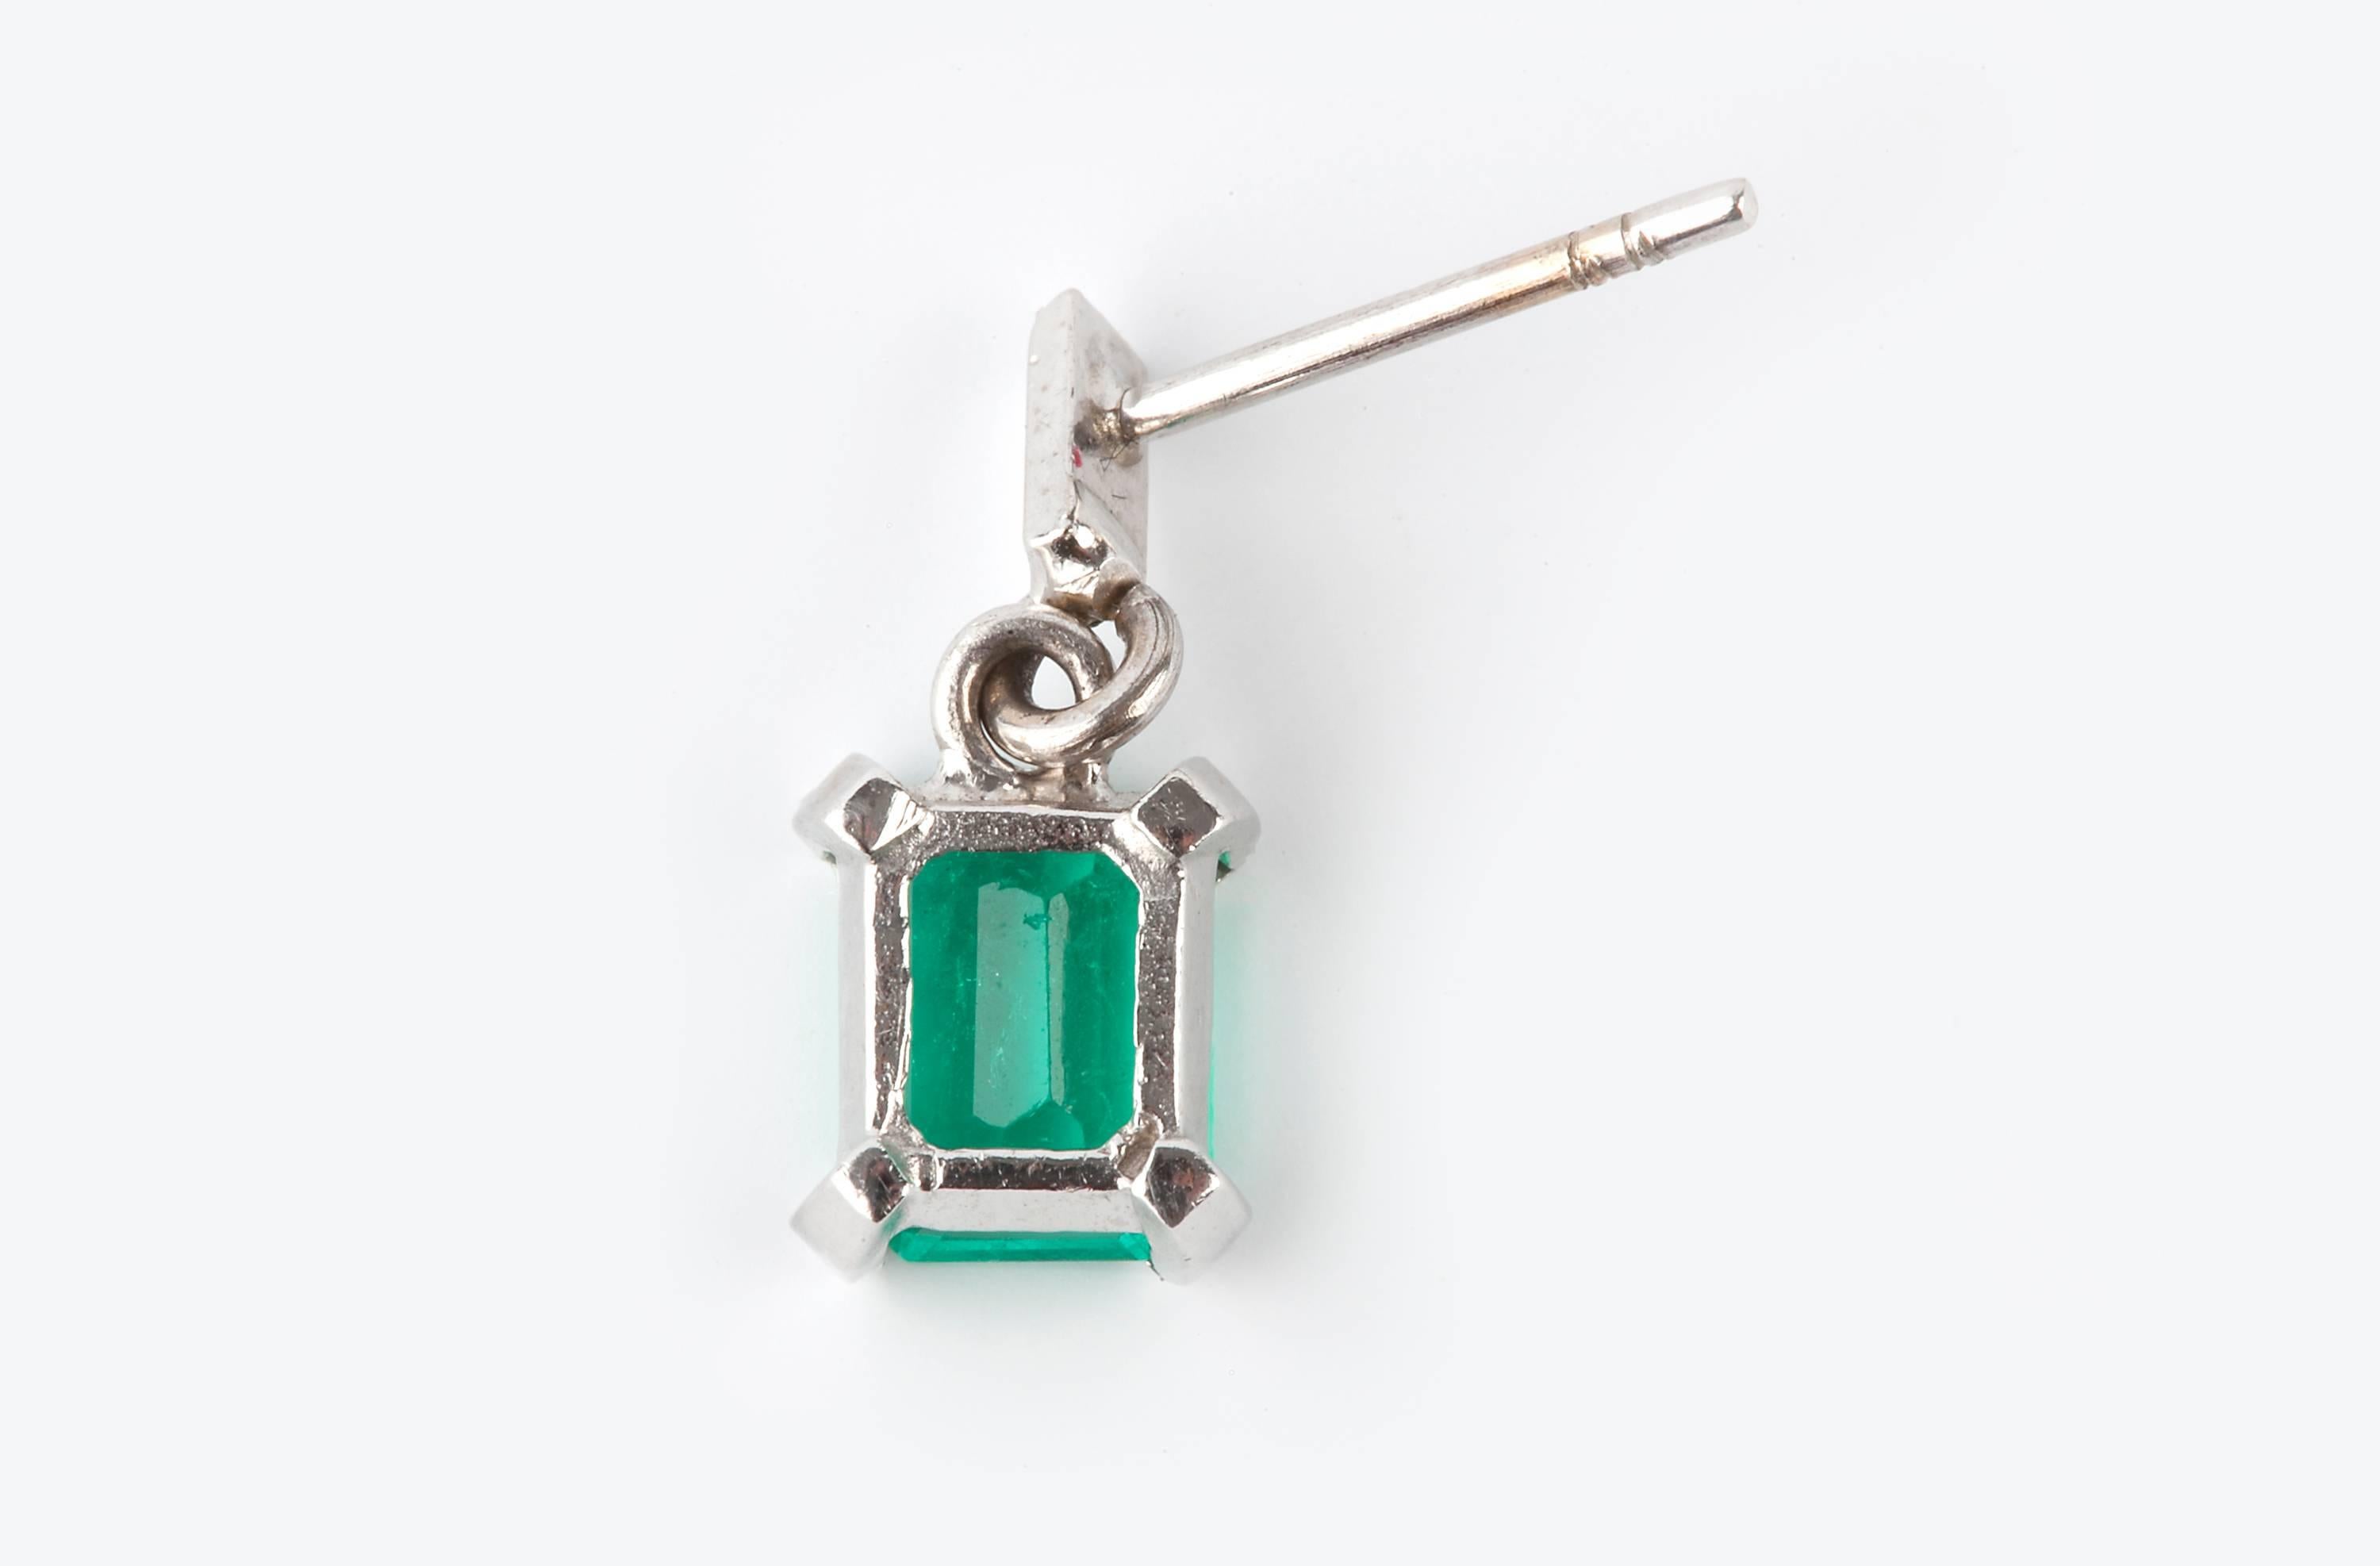 A pair of emerald earrings, AA quality, each set with a emerald cut stone weighing just under one carat, total carat weight about 1.9cts. Set in 18k white gold.